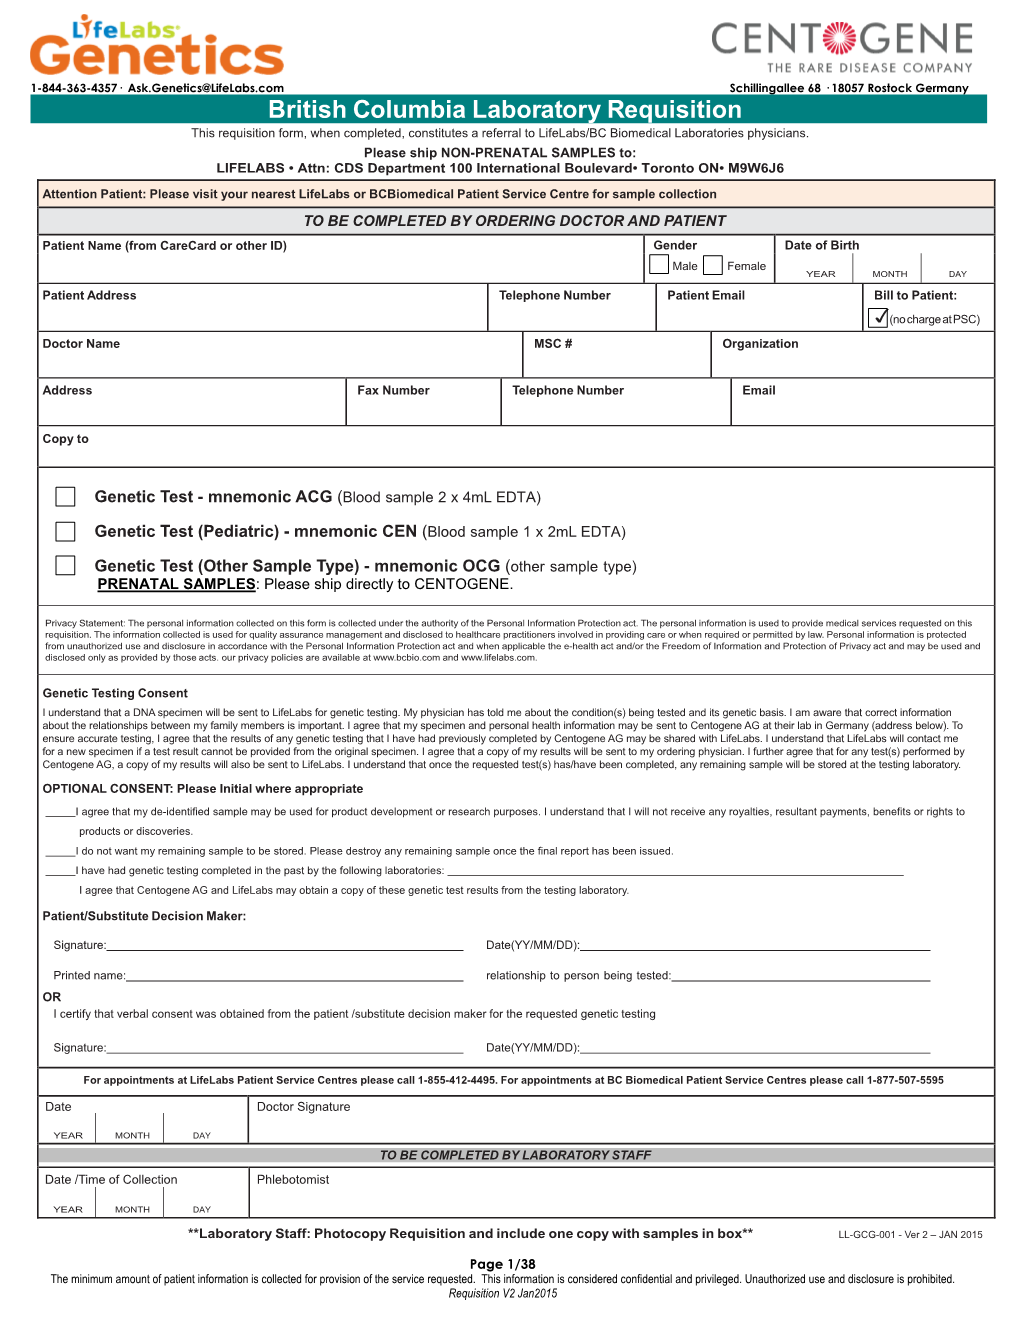 British Columbia Laboratory Requisition This Requisition Form, When Completed, Constitutes a Referral to Lifelabs/BC Biomedical Laboratories Physicians